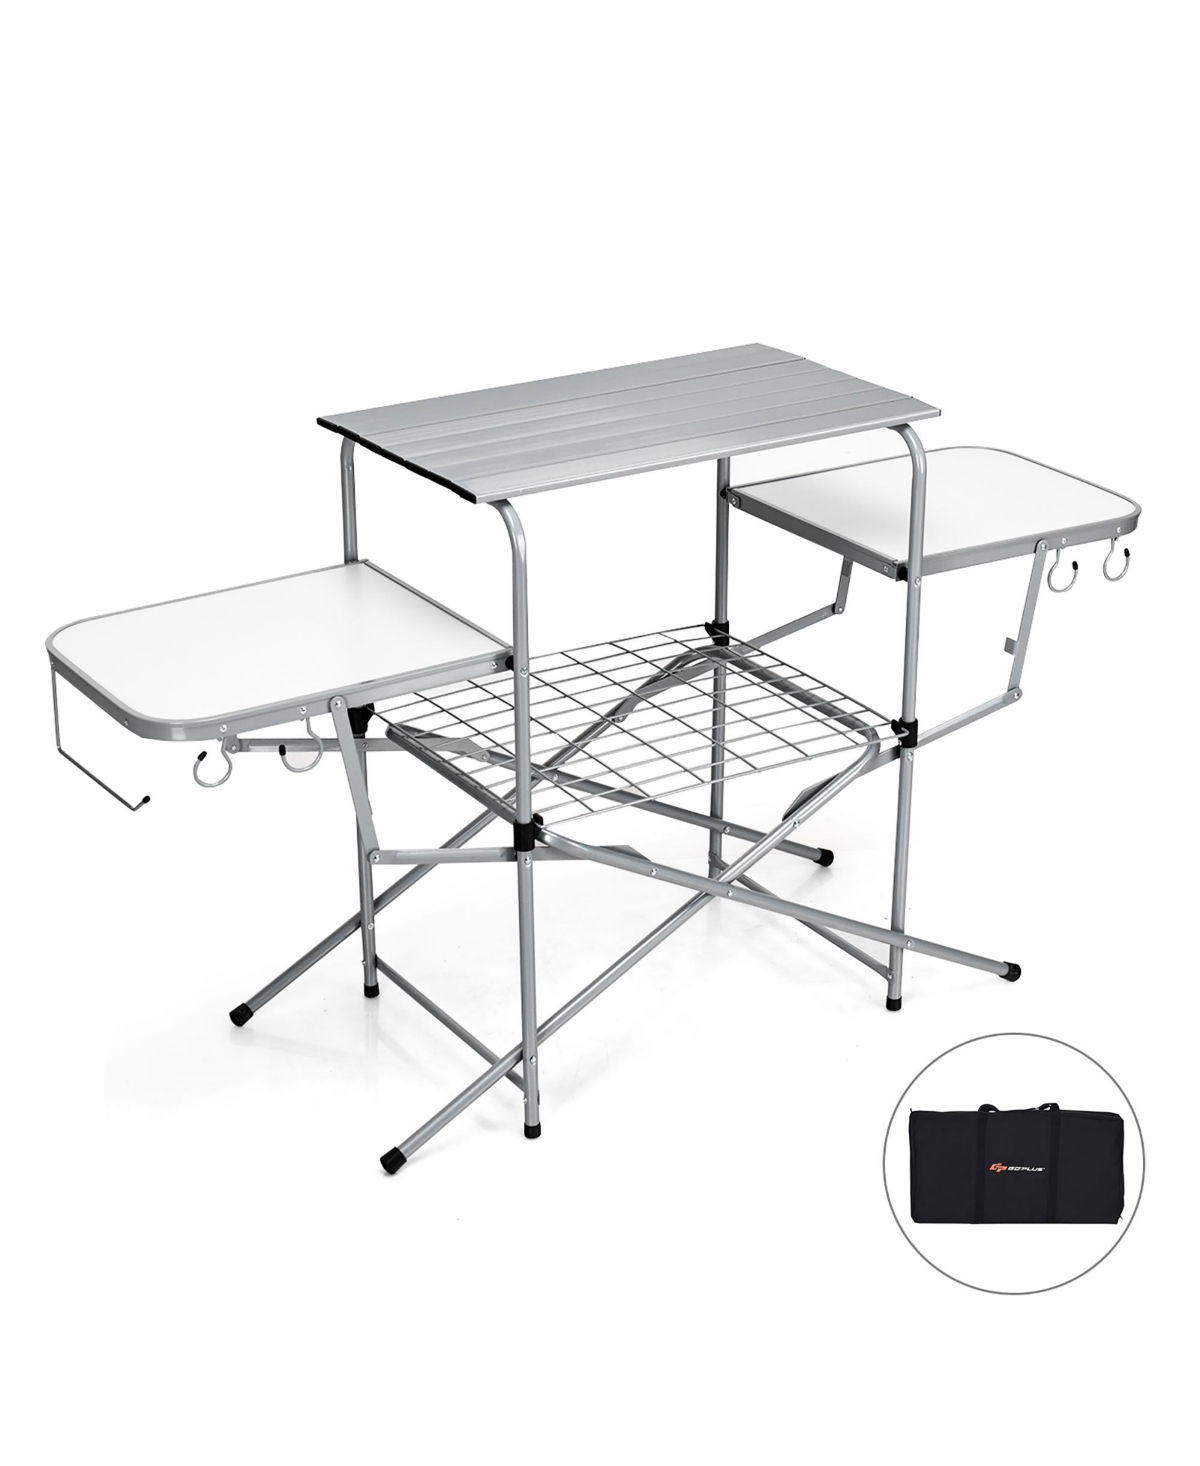 Foldable Camping Table Outdoor Kitchen Portable Grilling - Silver